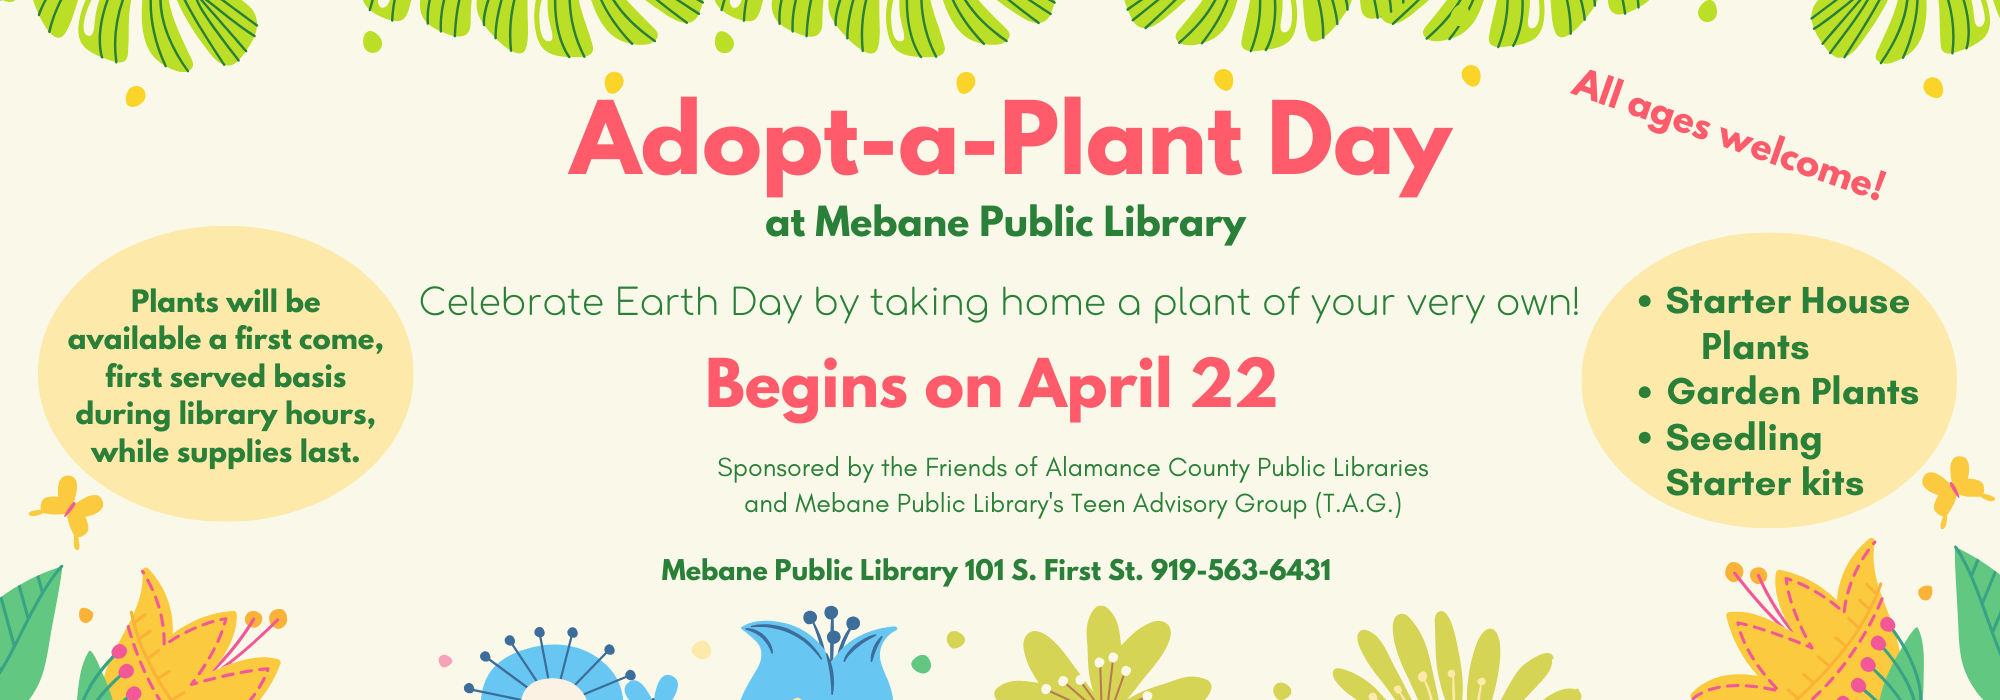 4.22 while supplies last - Adopt-A-Plant Day at Mebane